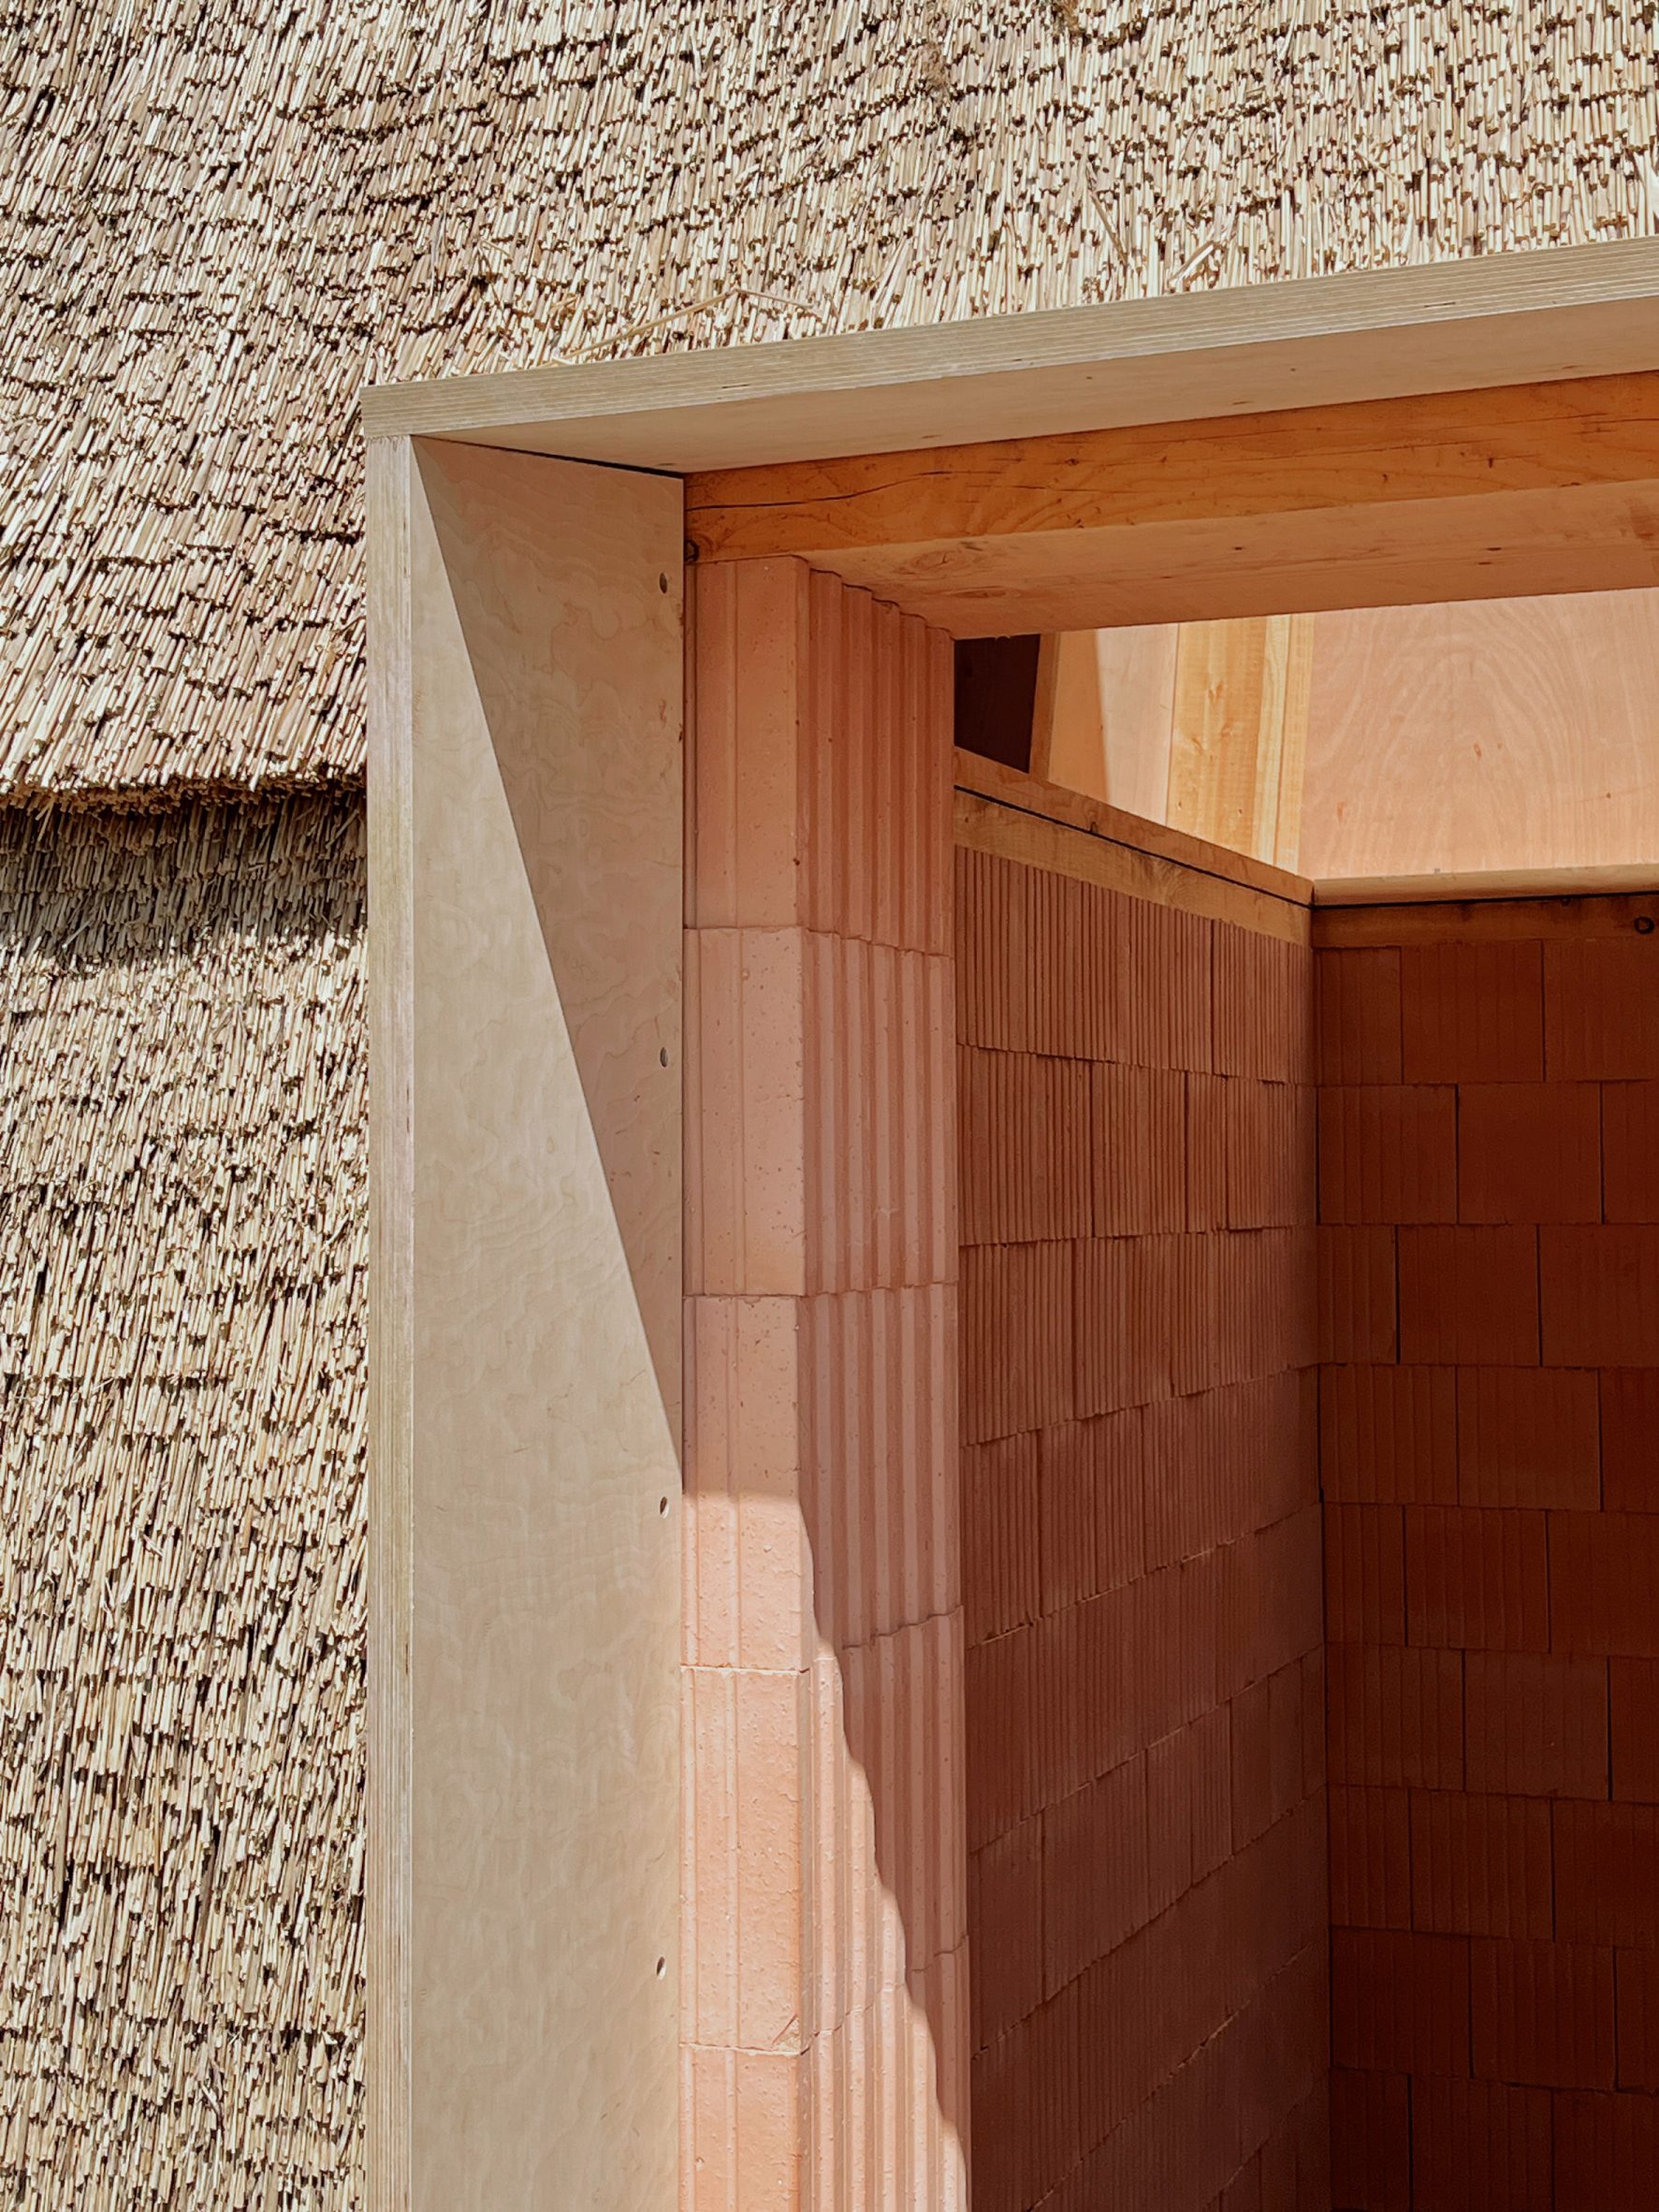 Thatched Brick Pavilion by Leth & Gori, Rønnow and CINARK